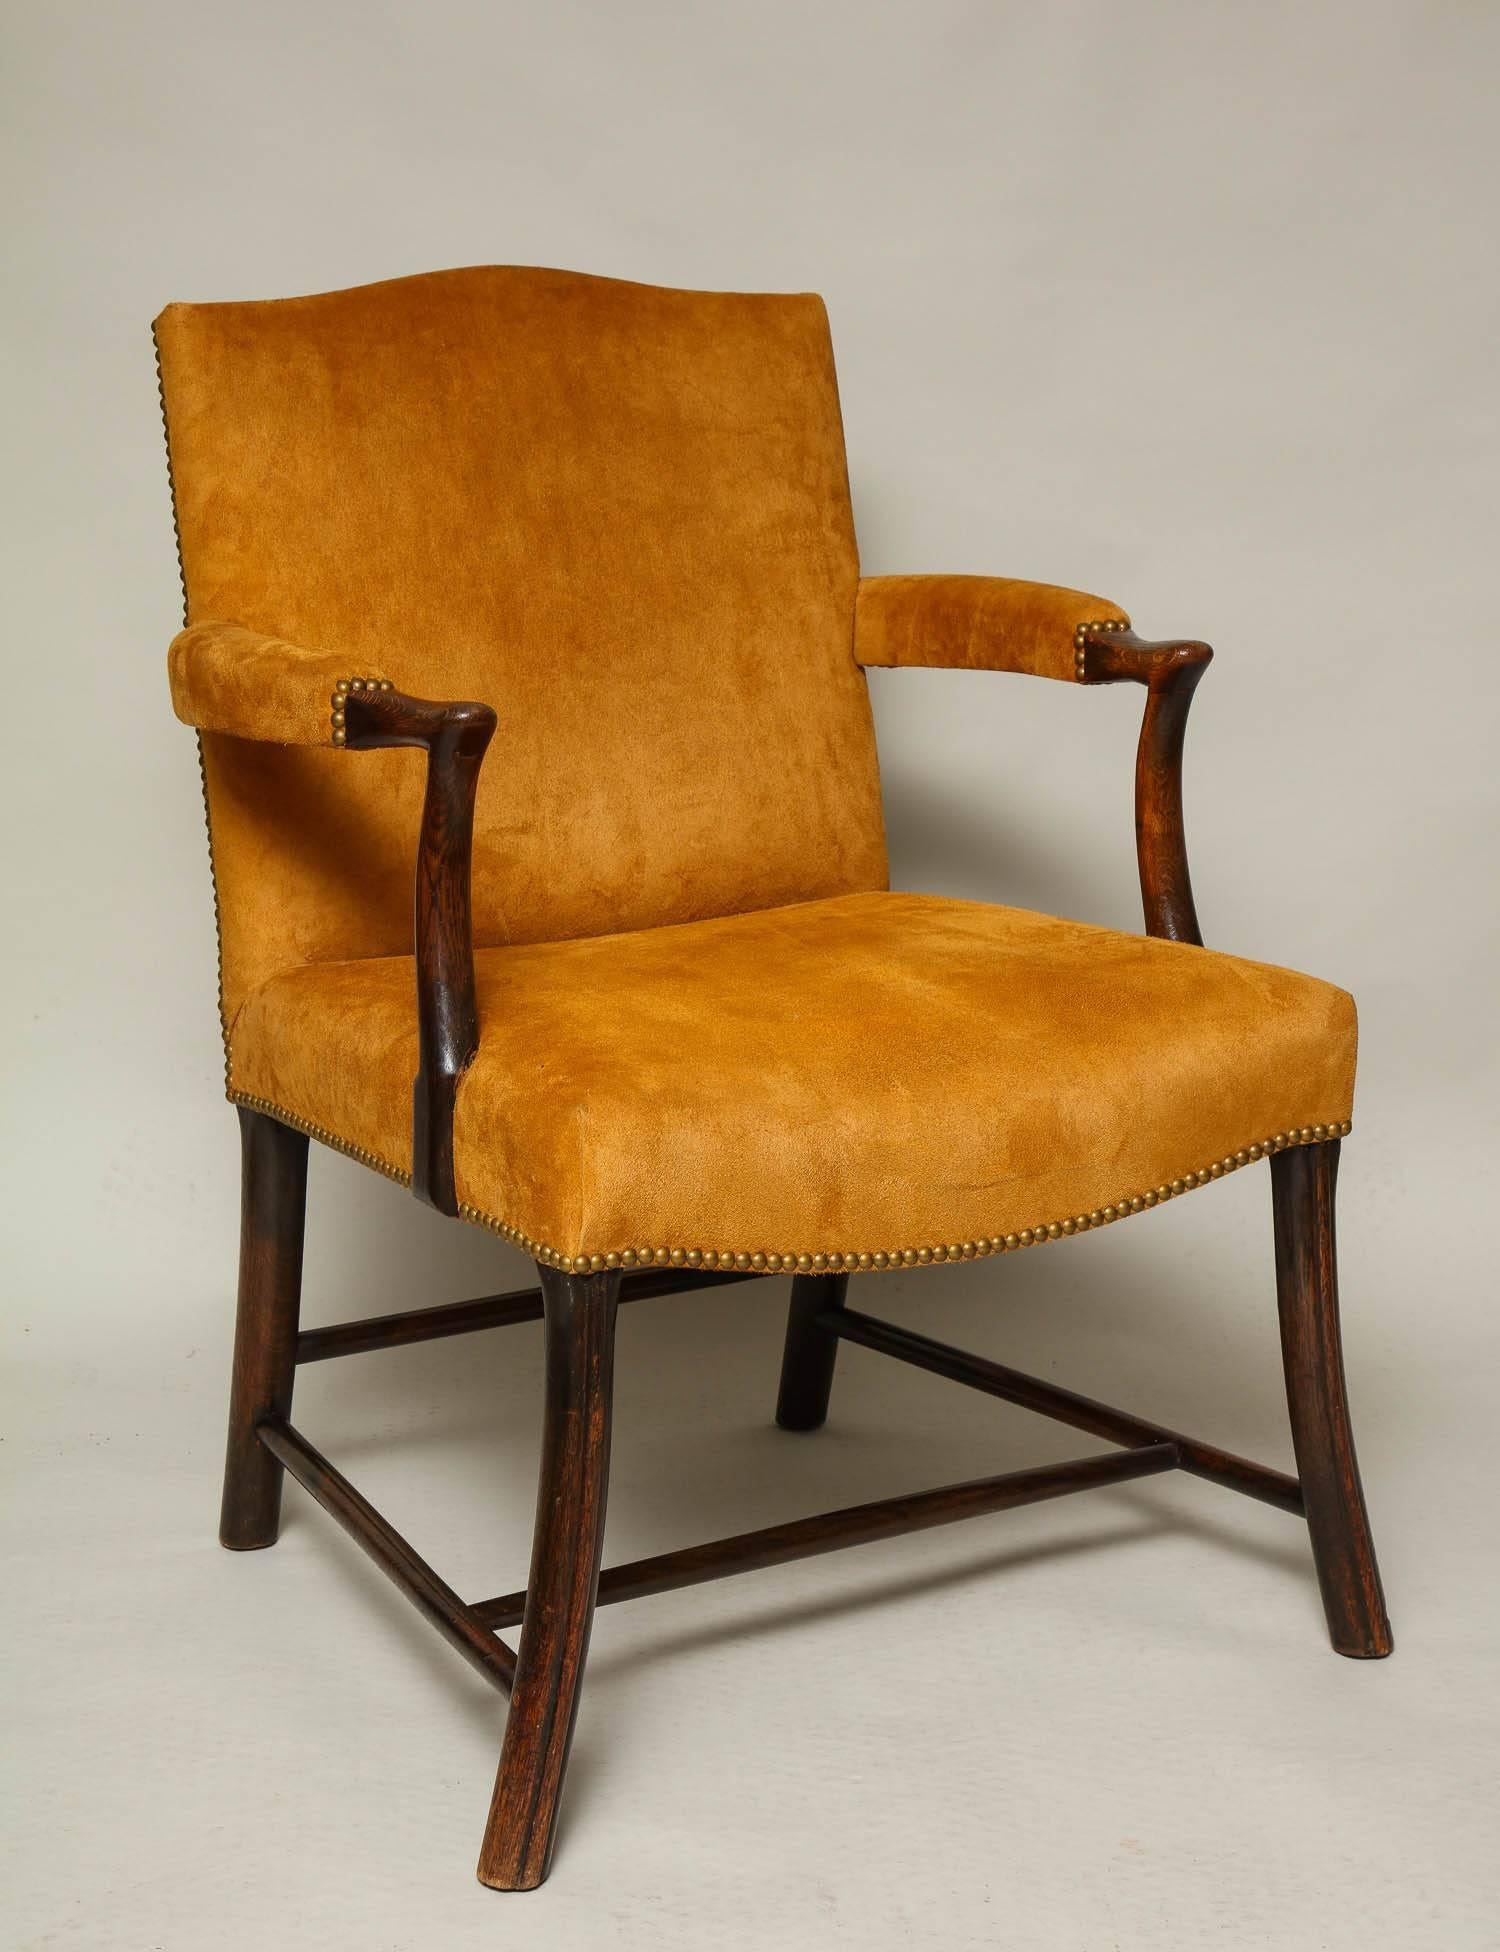 Good Scottish oak and suede Gainsborough or library chair of unusual design, the arched back over padded arms with simple rolled hands, the dished and swell fronted seat with close nail decoration and standing on unusual channeled outswept legs